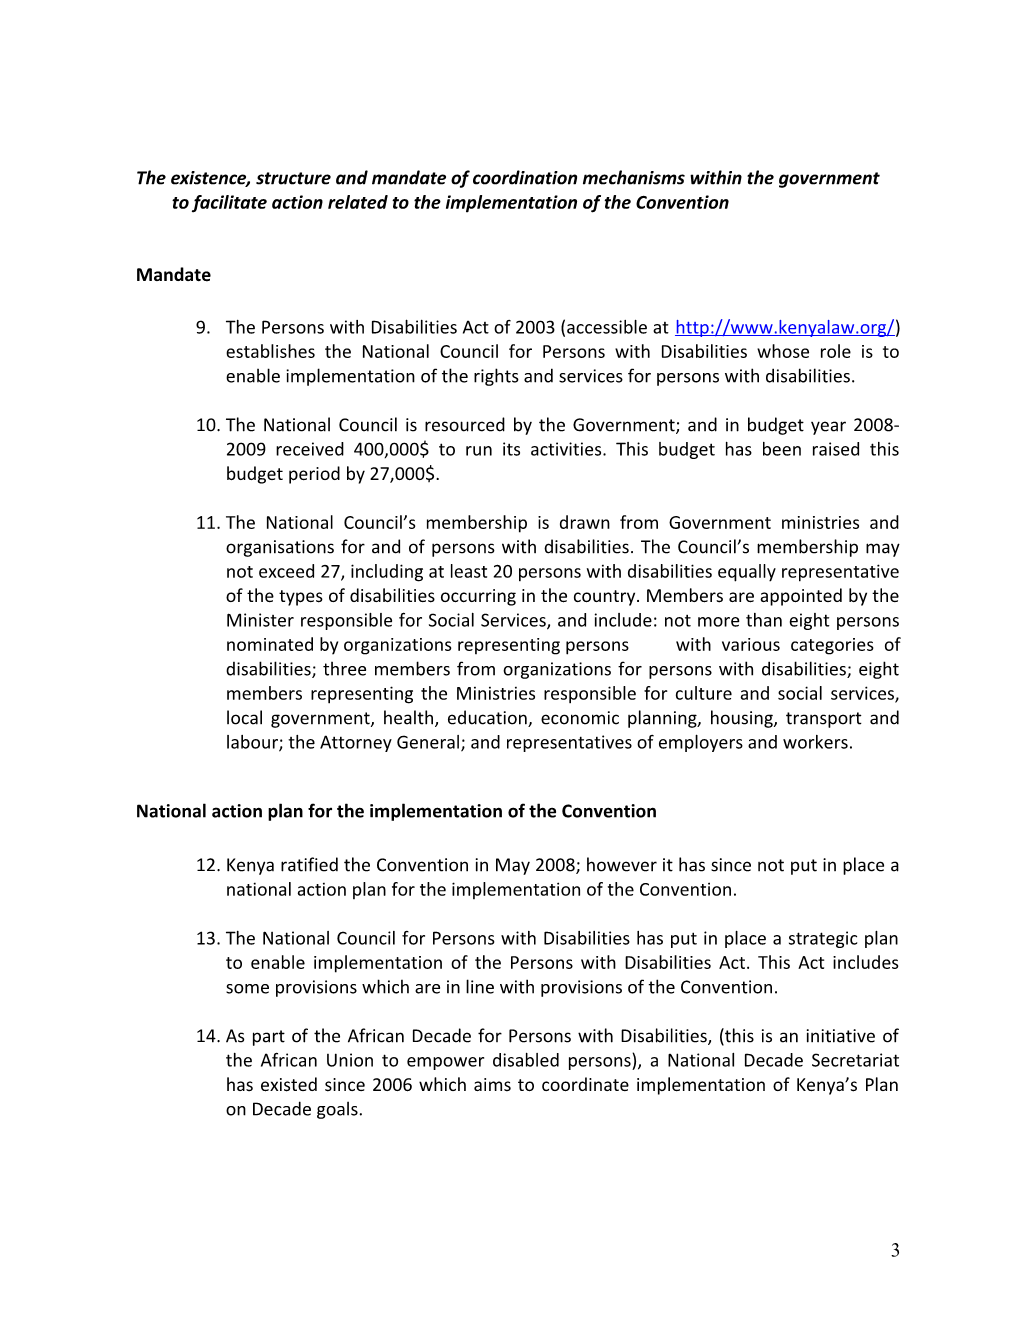 Implementation of Article 33 of the International Convention on the Rights of Persons